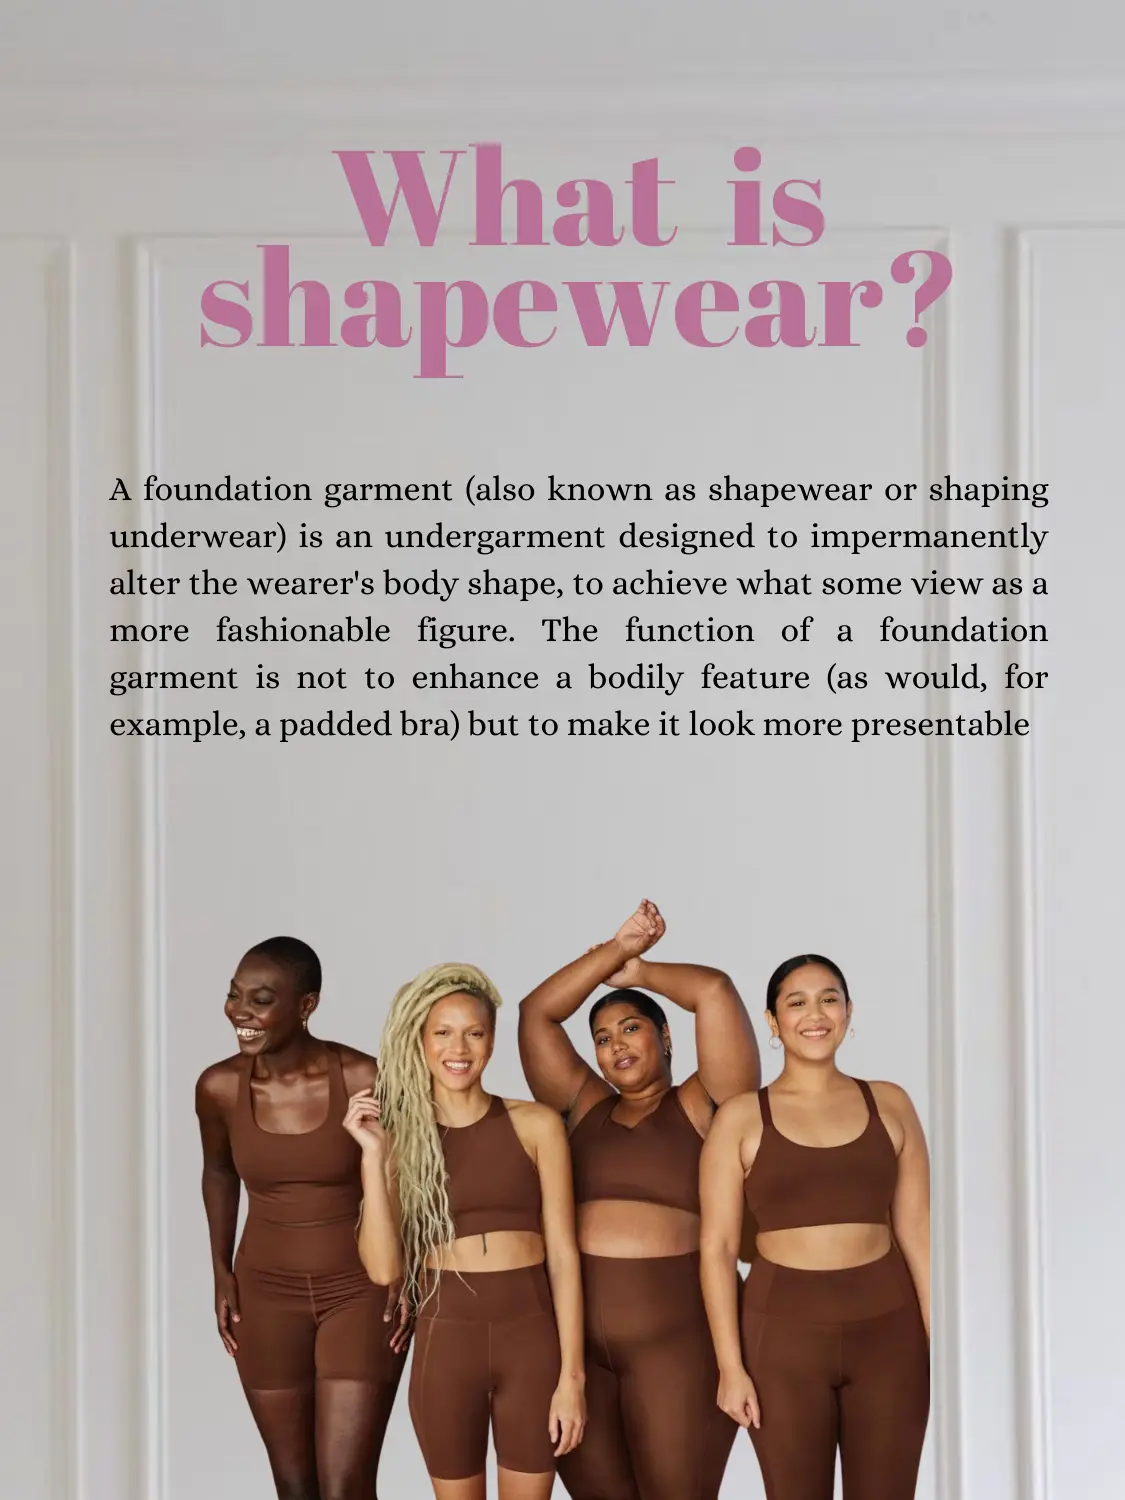 We know you'll love our sizing videos ✨ Shapewear made to be seen &  flattering on all bodies! We know you'll love it 🫶🏻 .